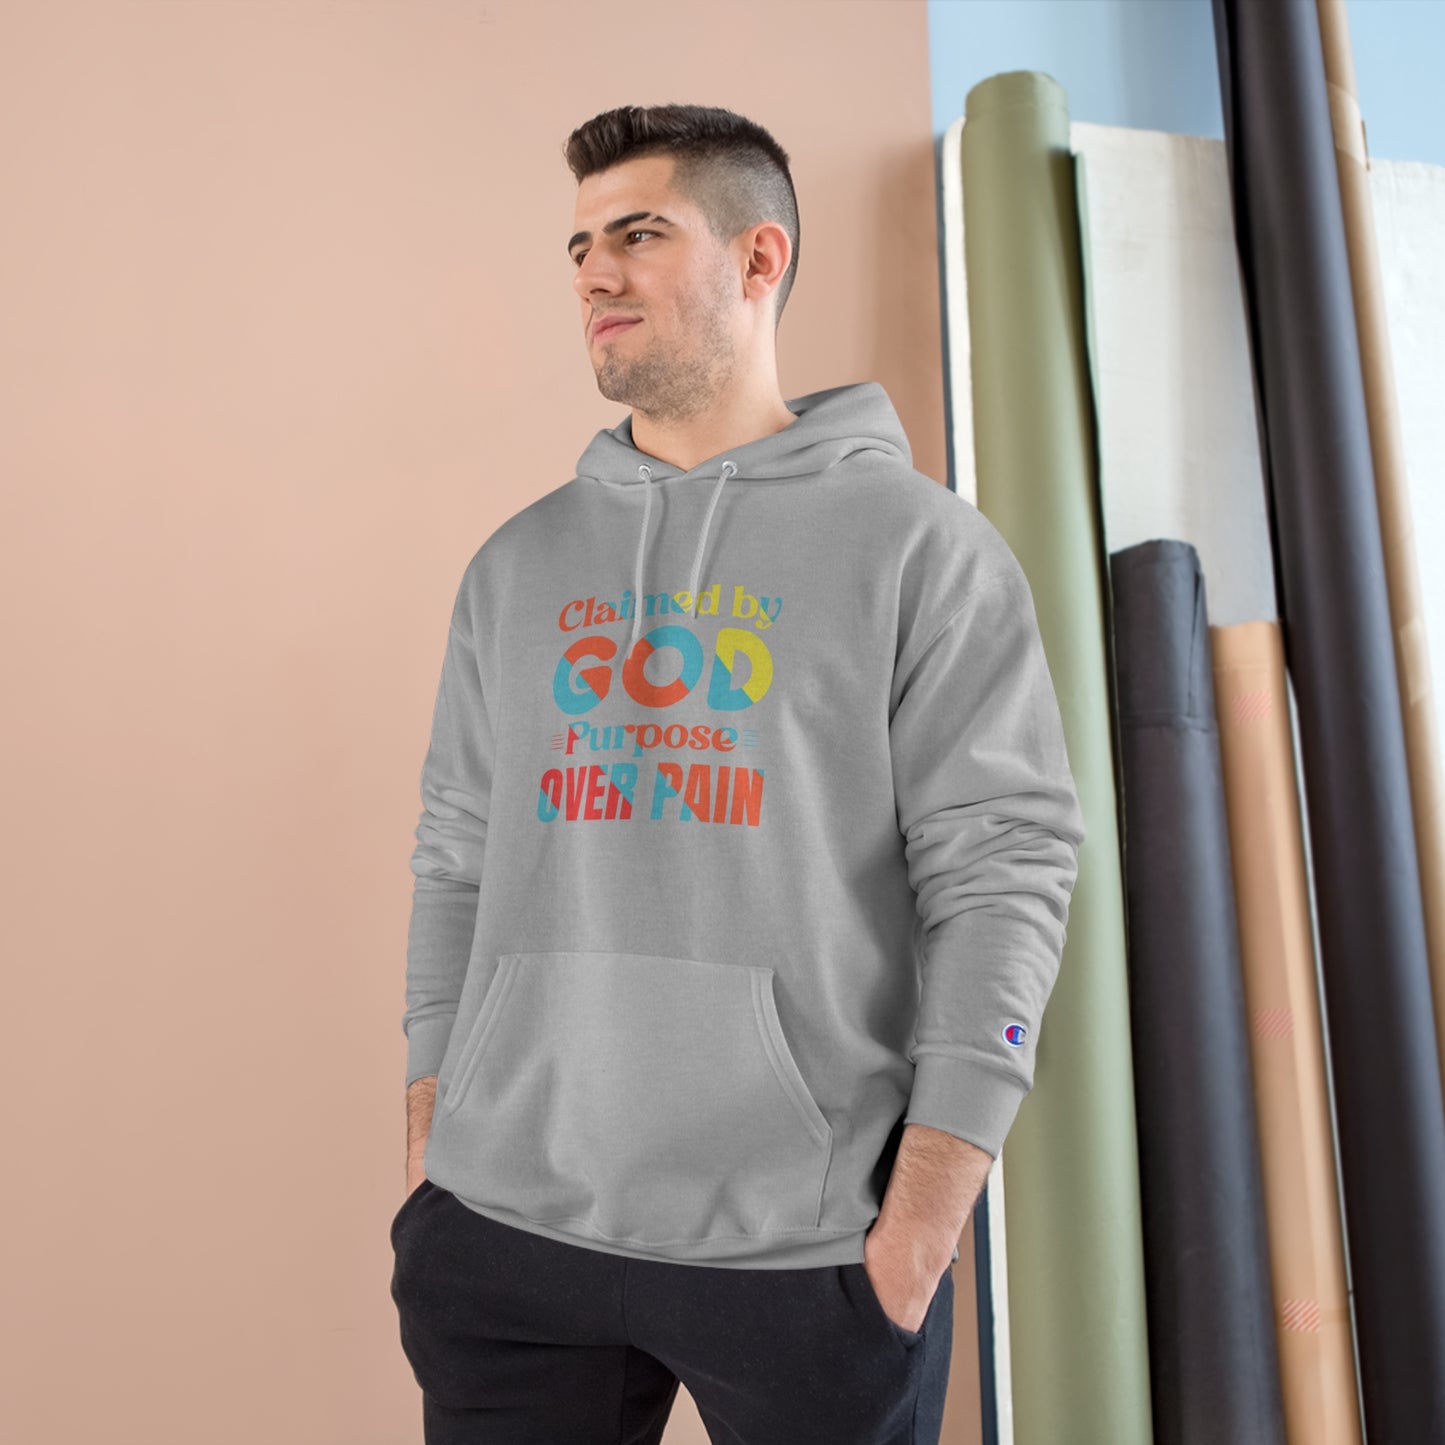 Claimed By God Purpose Over Pain Christian Unisex Champion Hoodie Printify